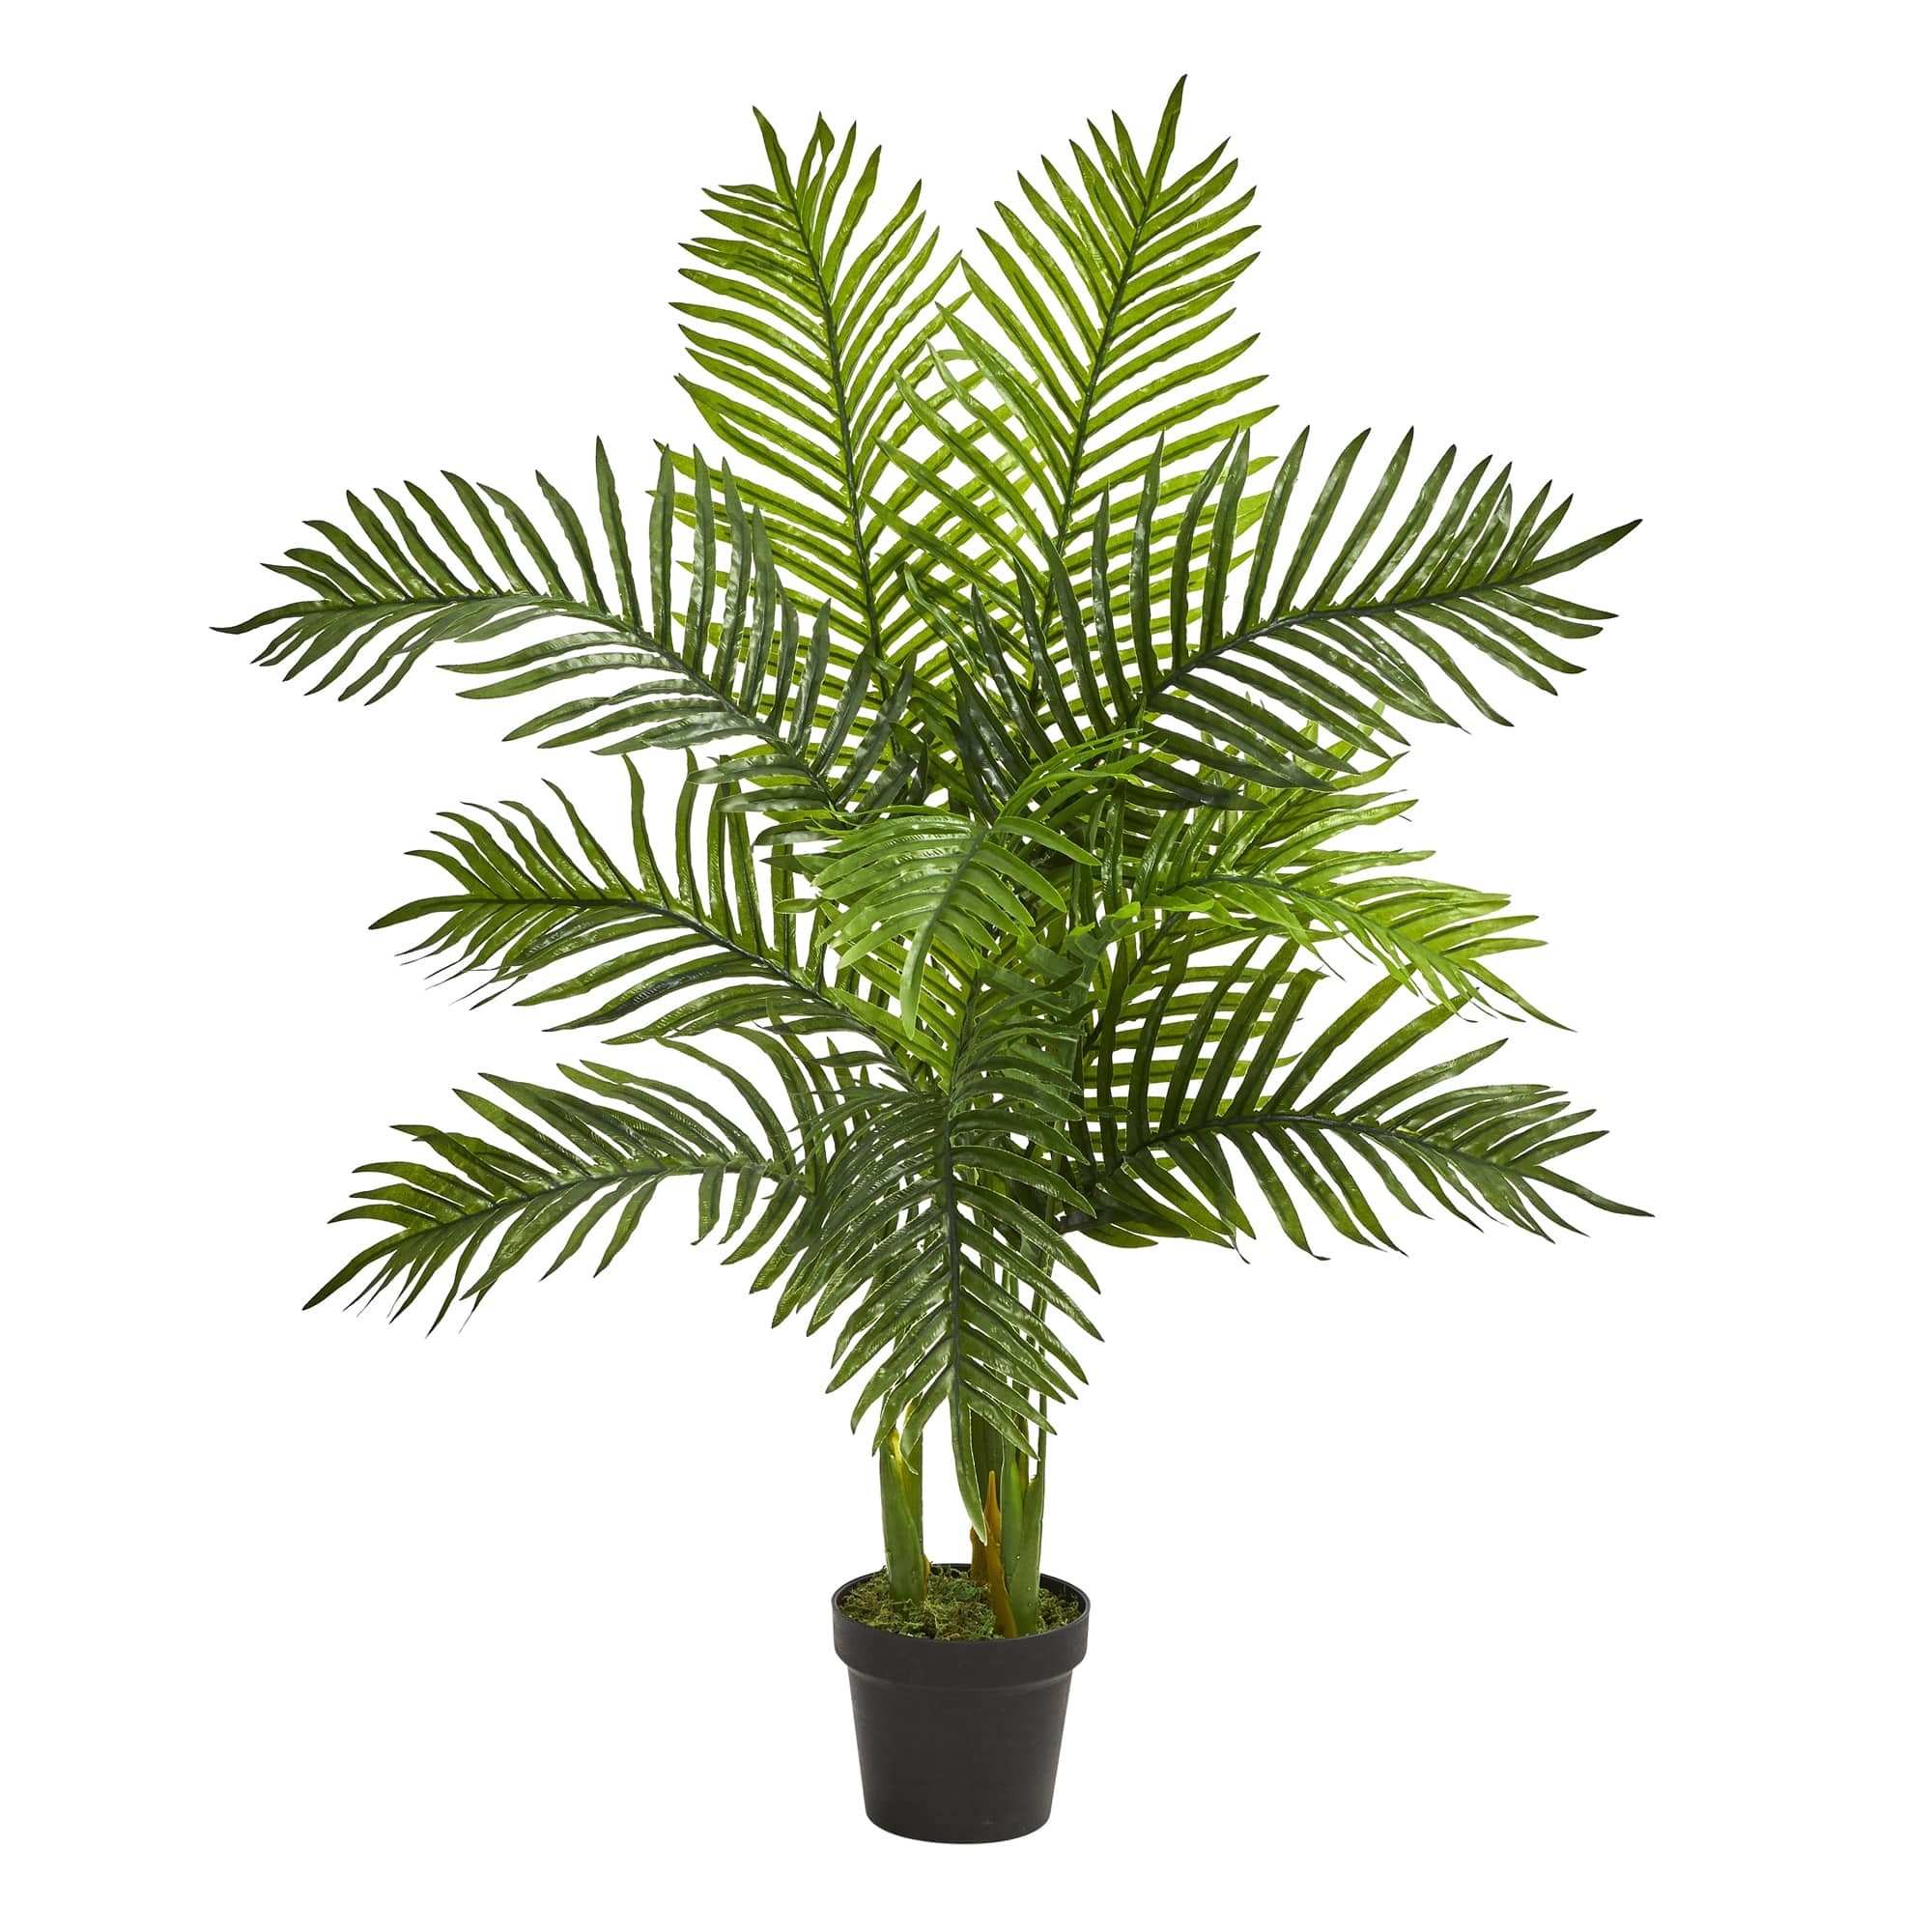 3.5ft. Potted Areca Palm Tree